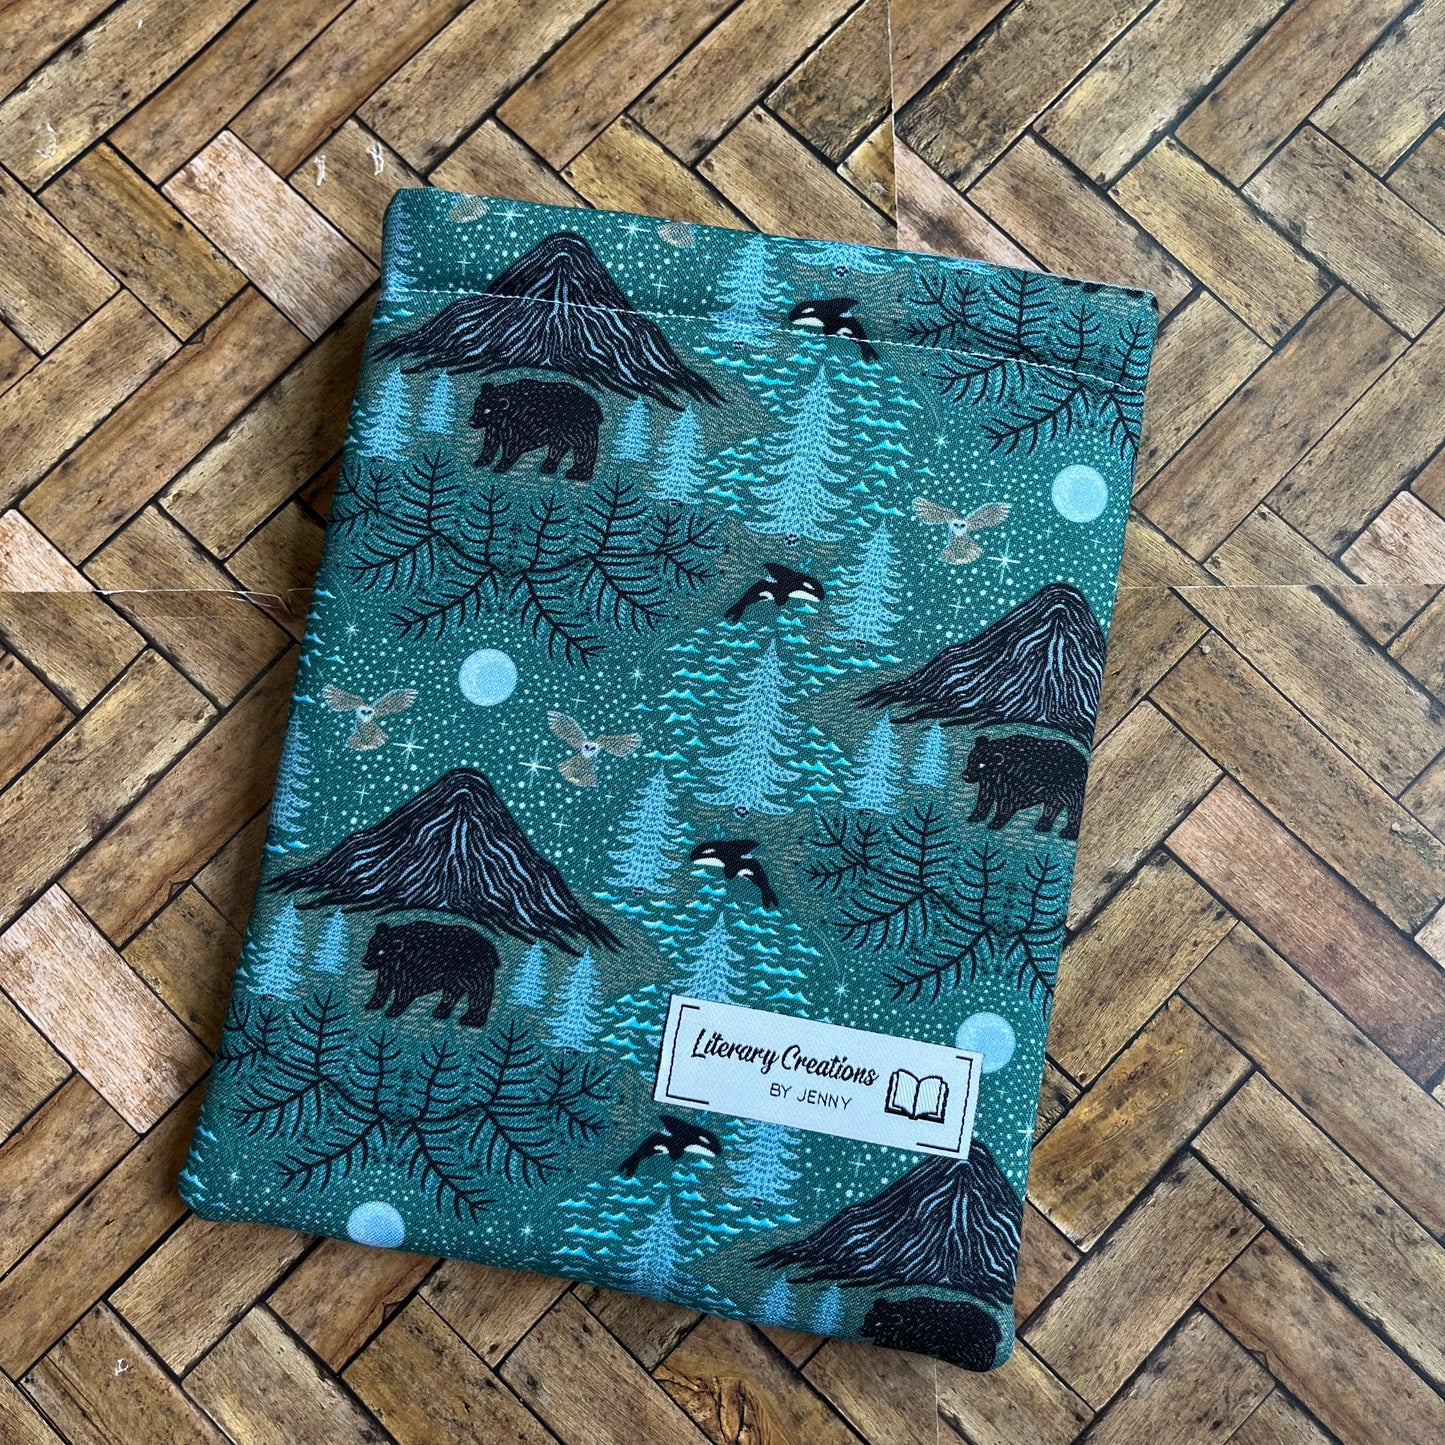 Animals and Mountains Book Sleeve